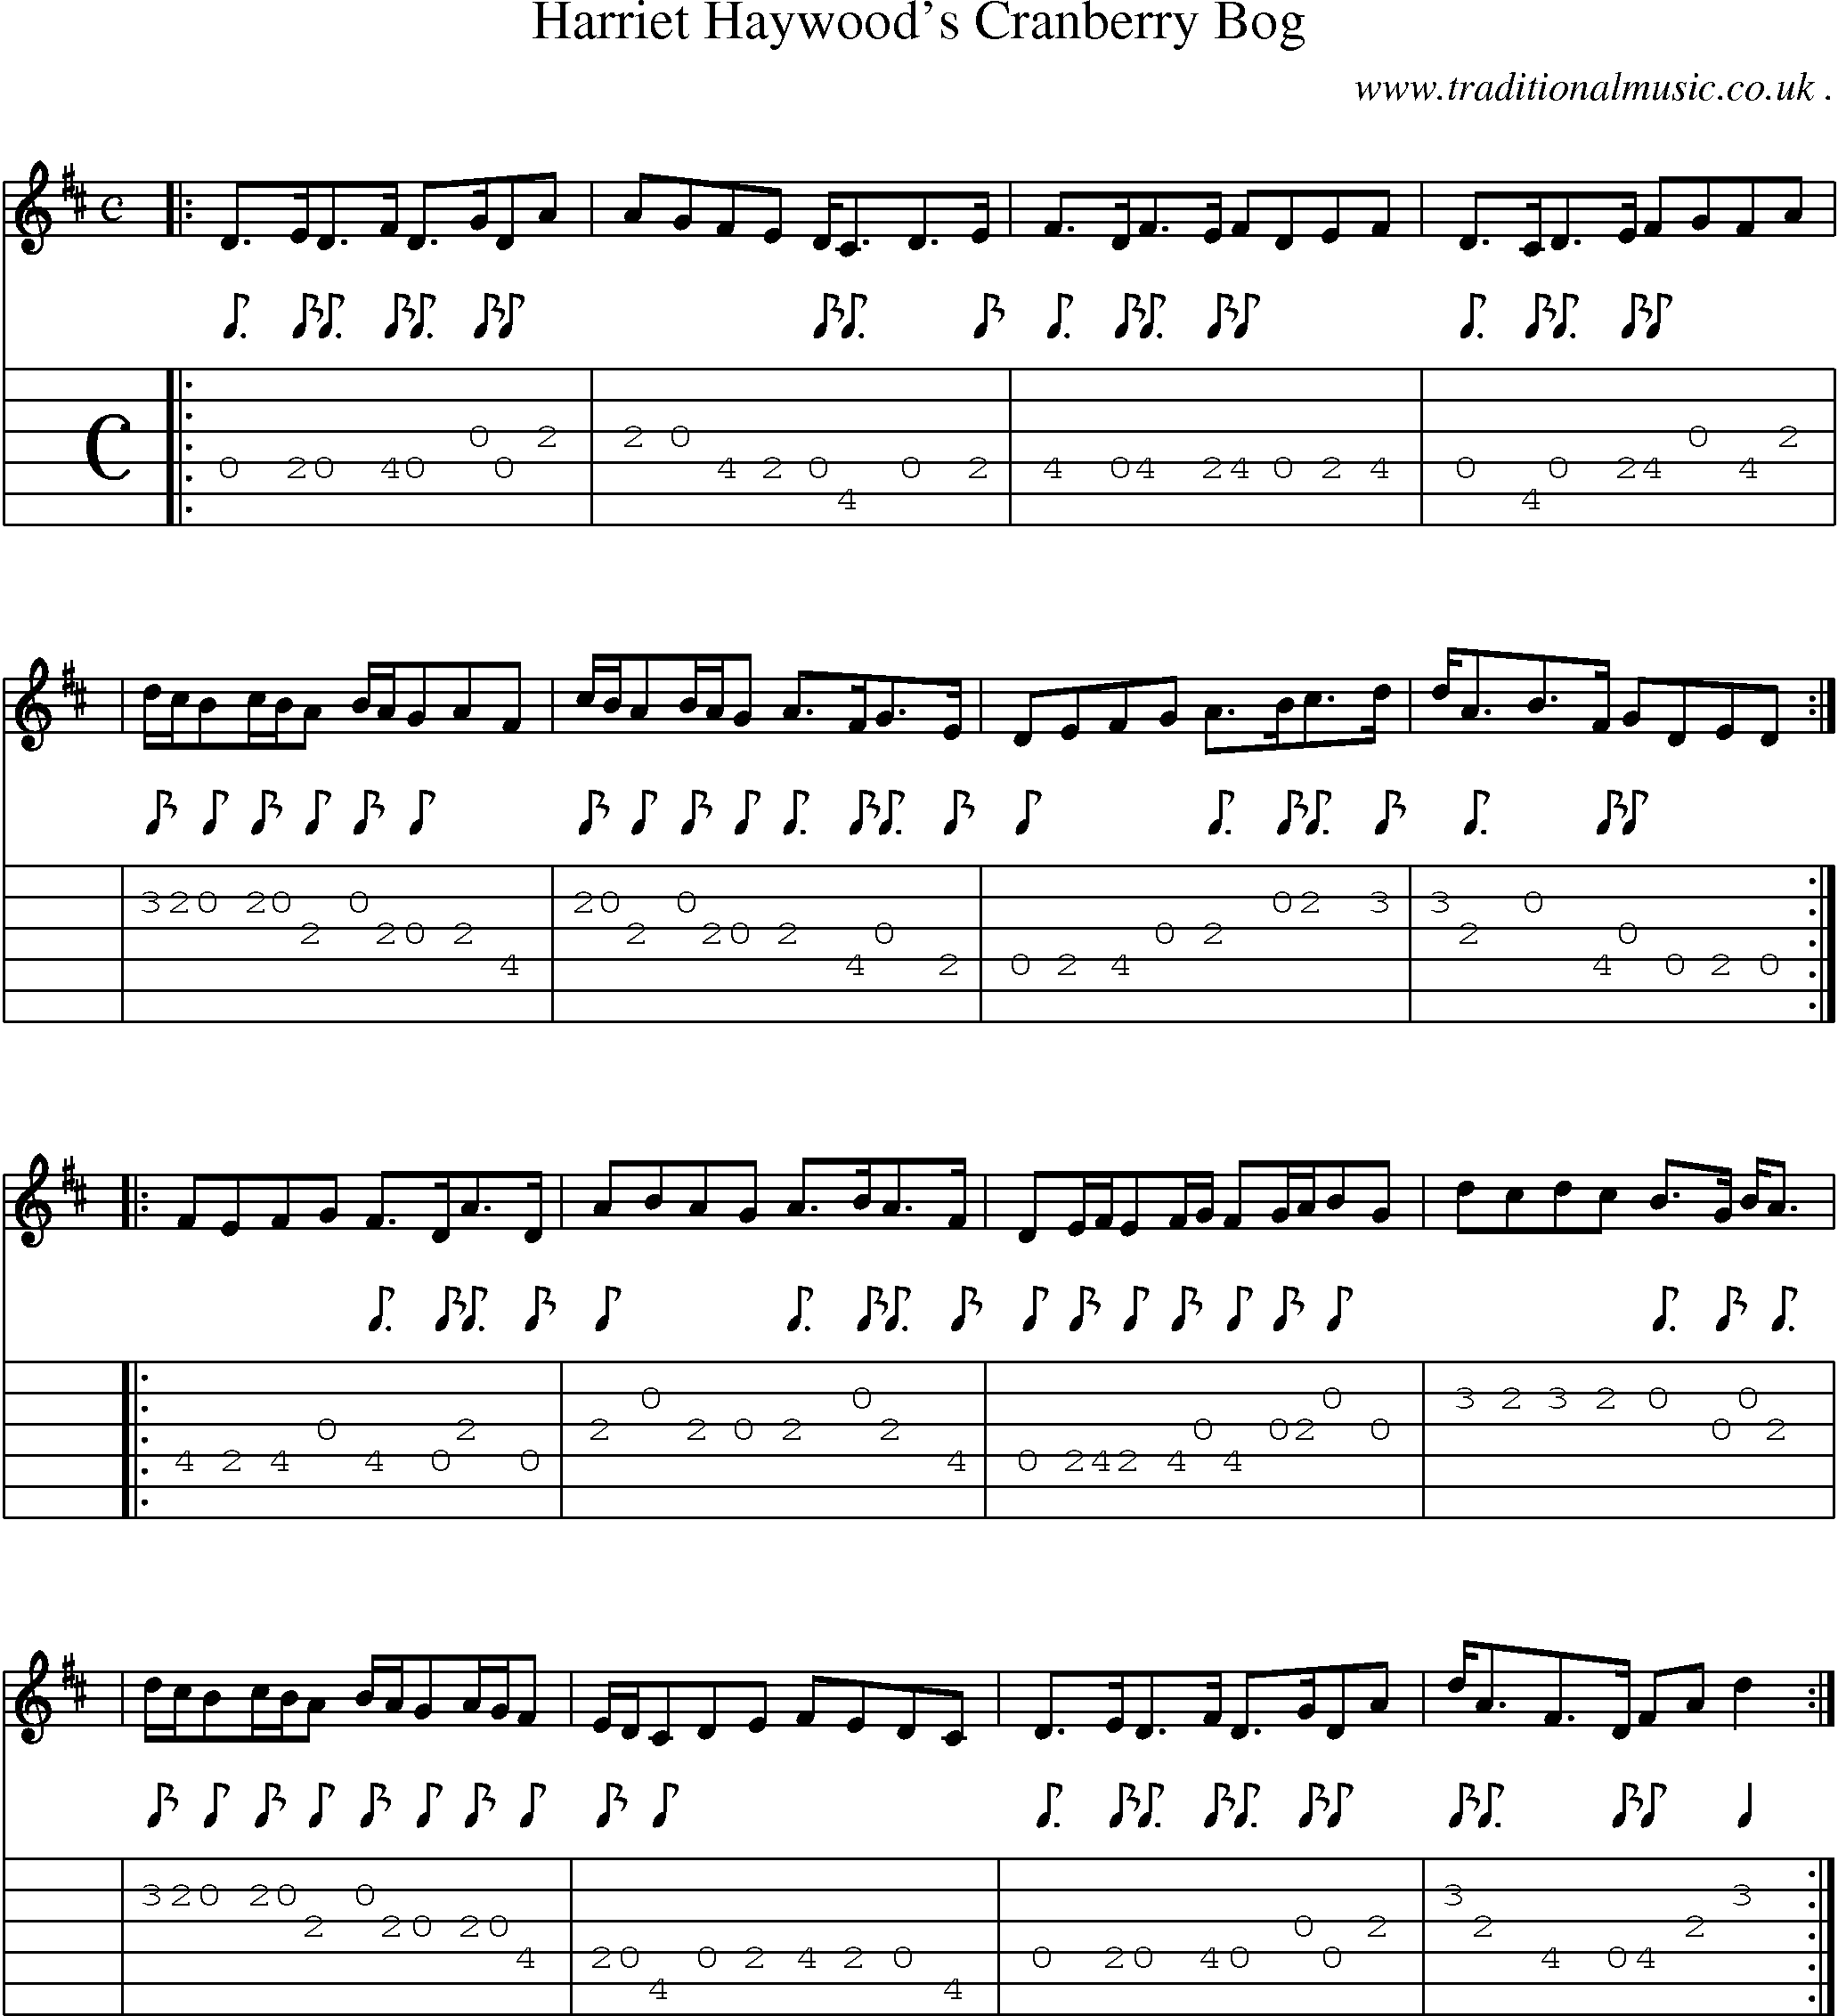 Sheet-music  score, Chords and Guitar Tabs for Harriet Haywoods Cranberry Bog